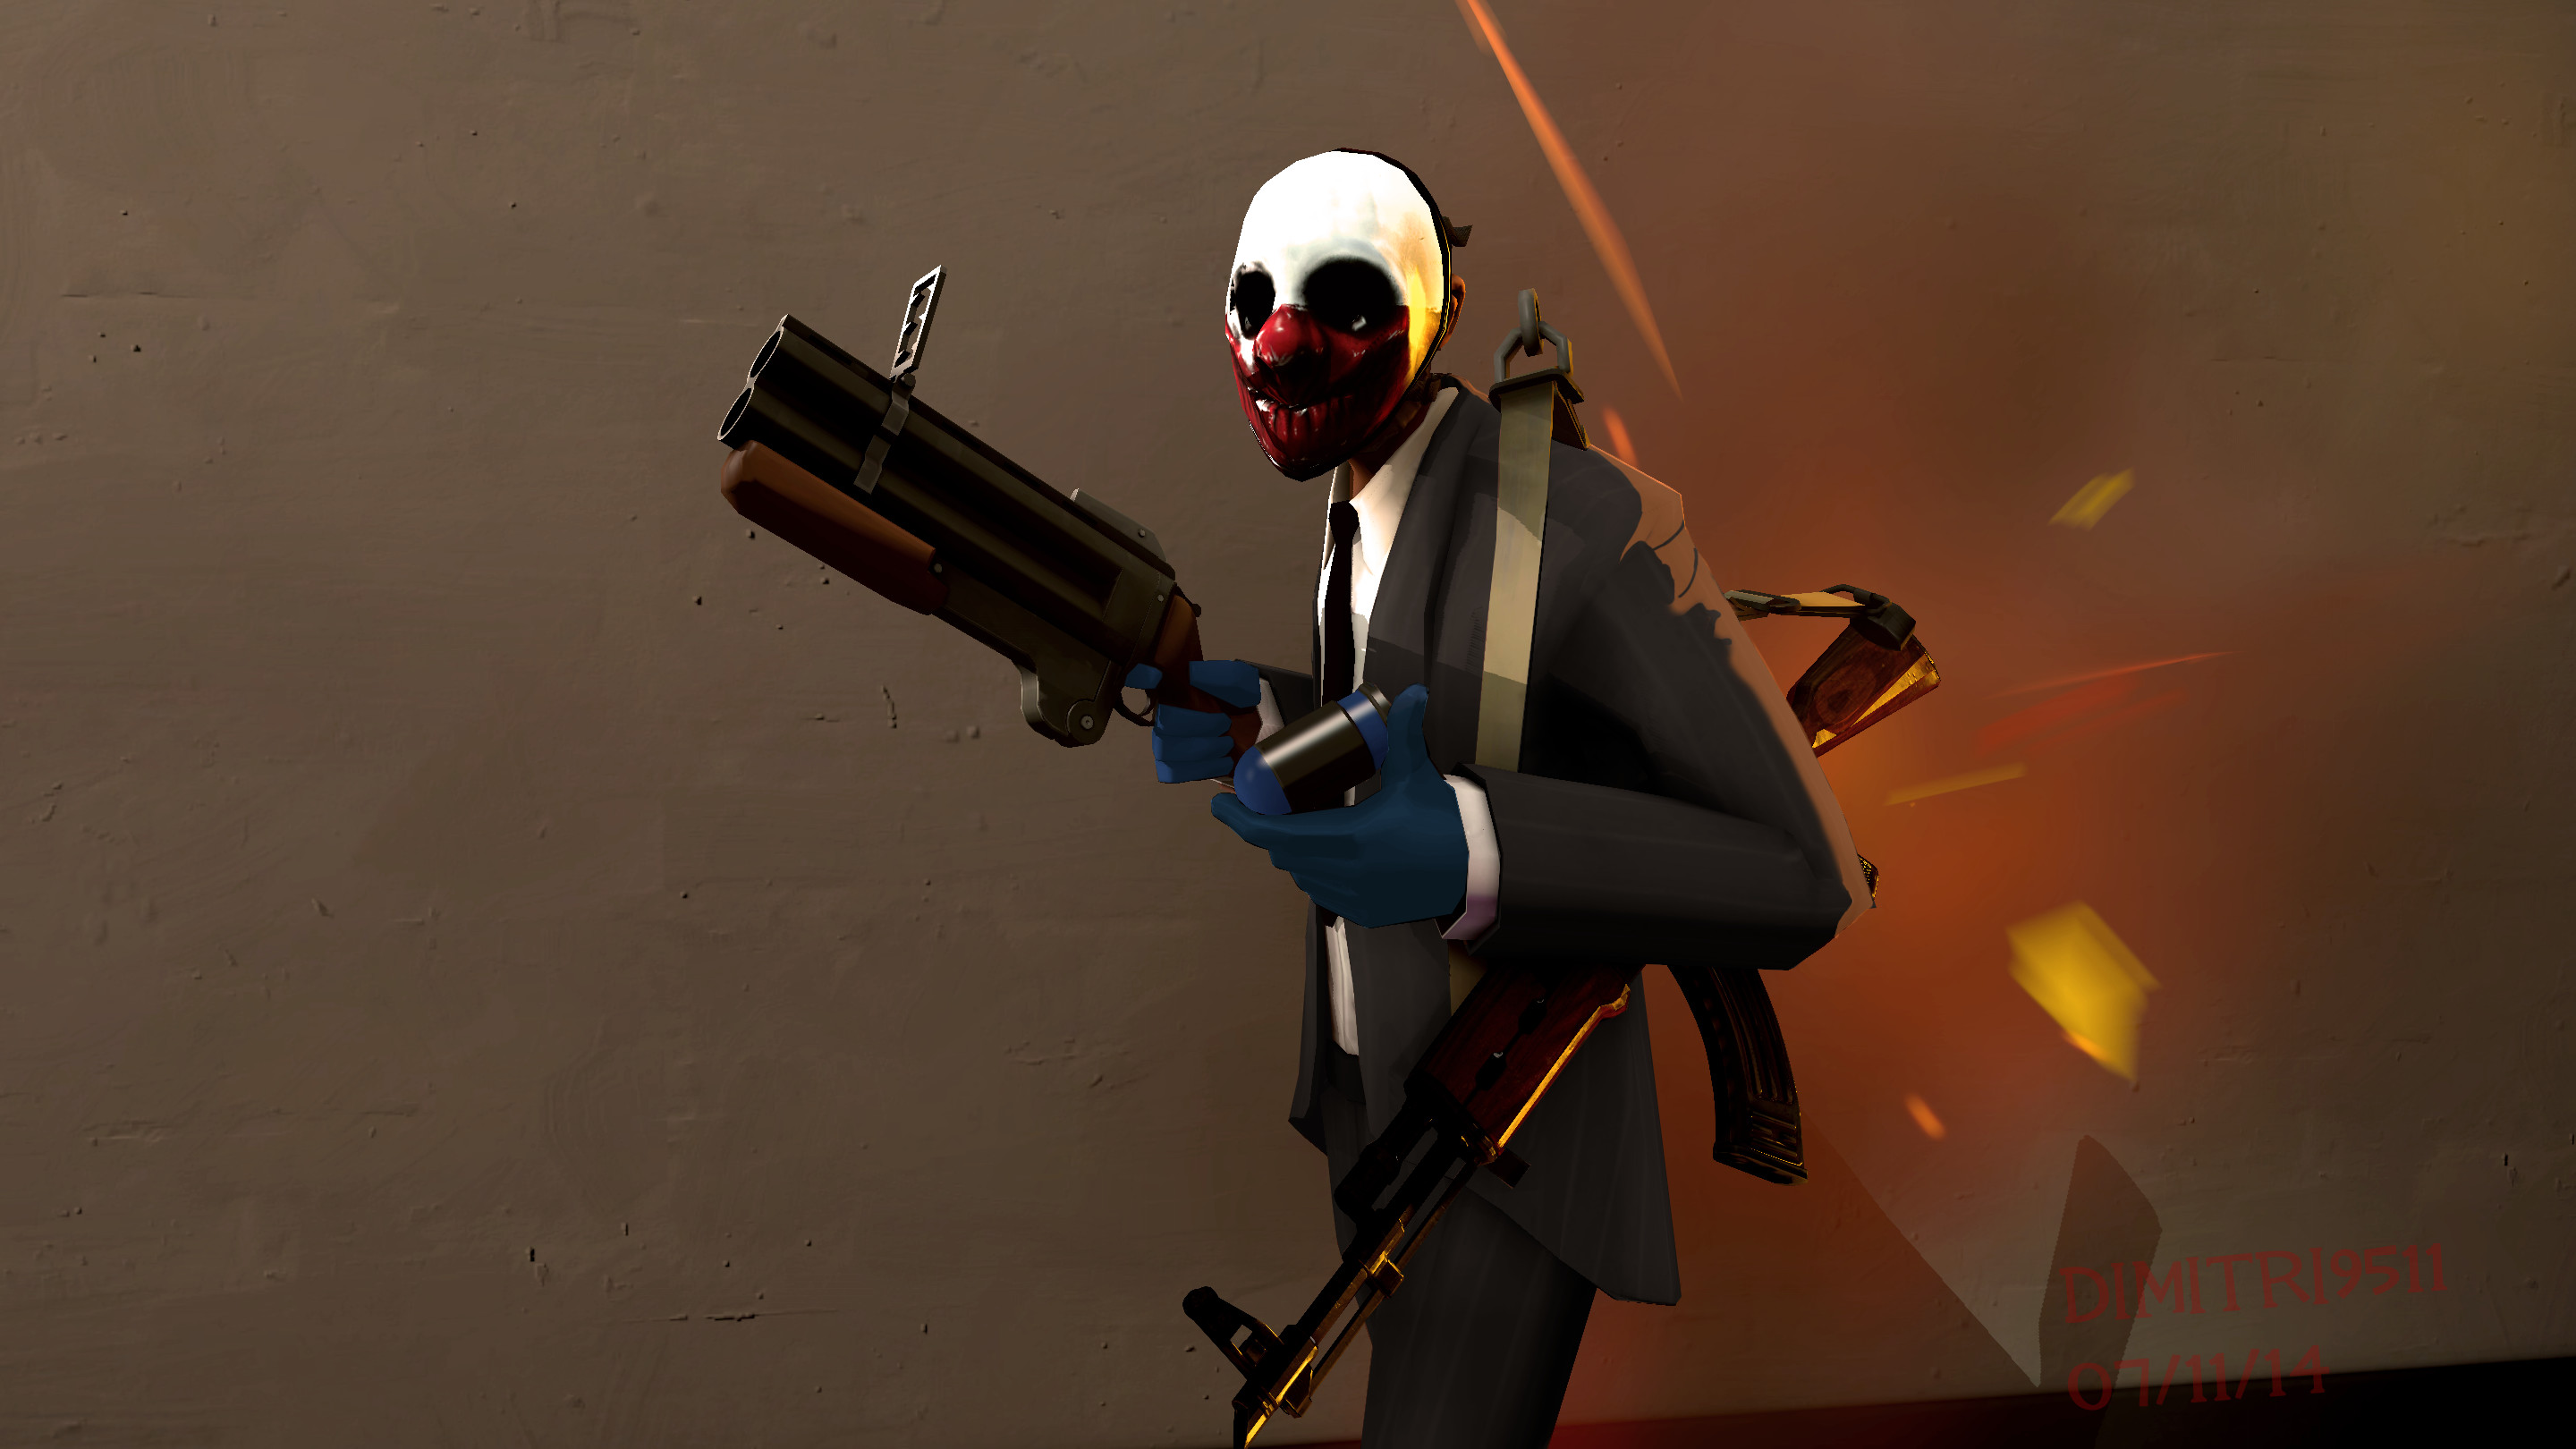 2880x1620 ... Wolf from Payday the Heist/Payday 2 by Dimitri9511